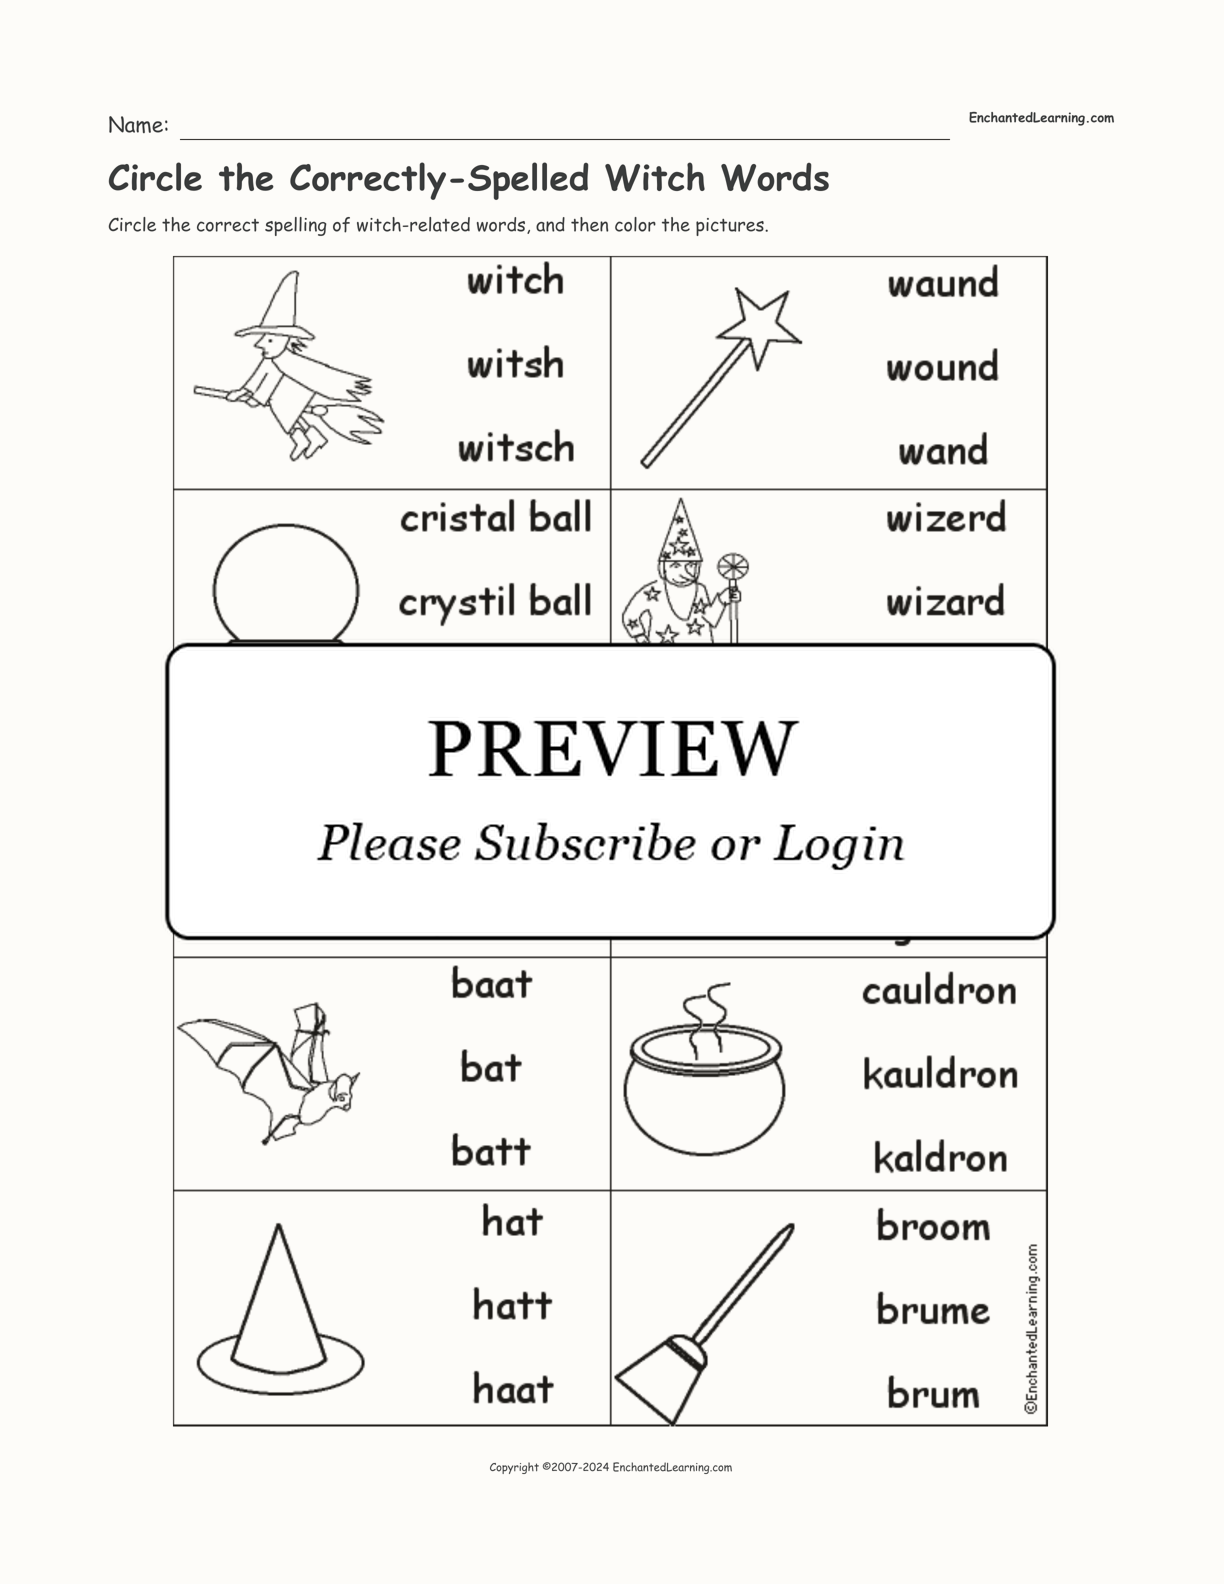 Circle the Correctly-Spelled Witch Words interactive worksheet page 1